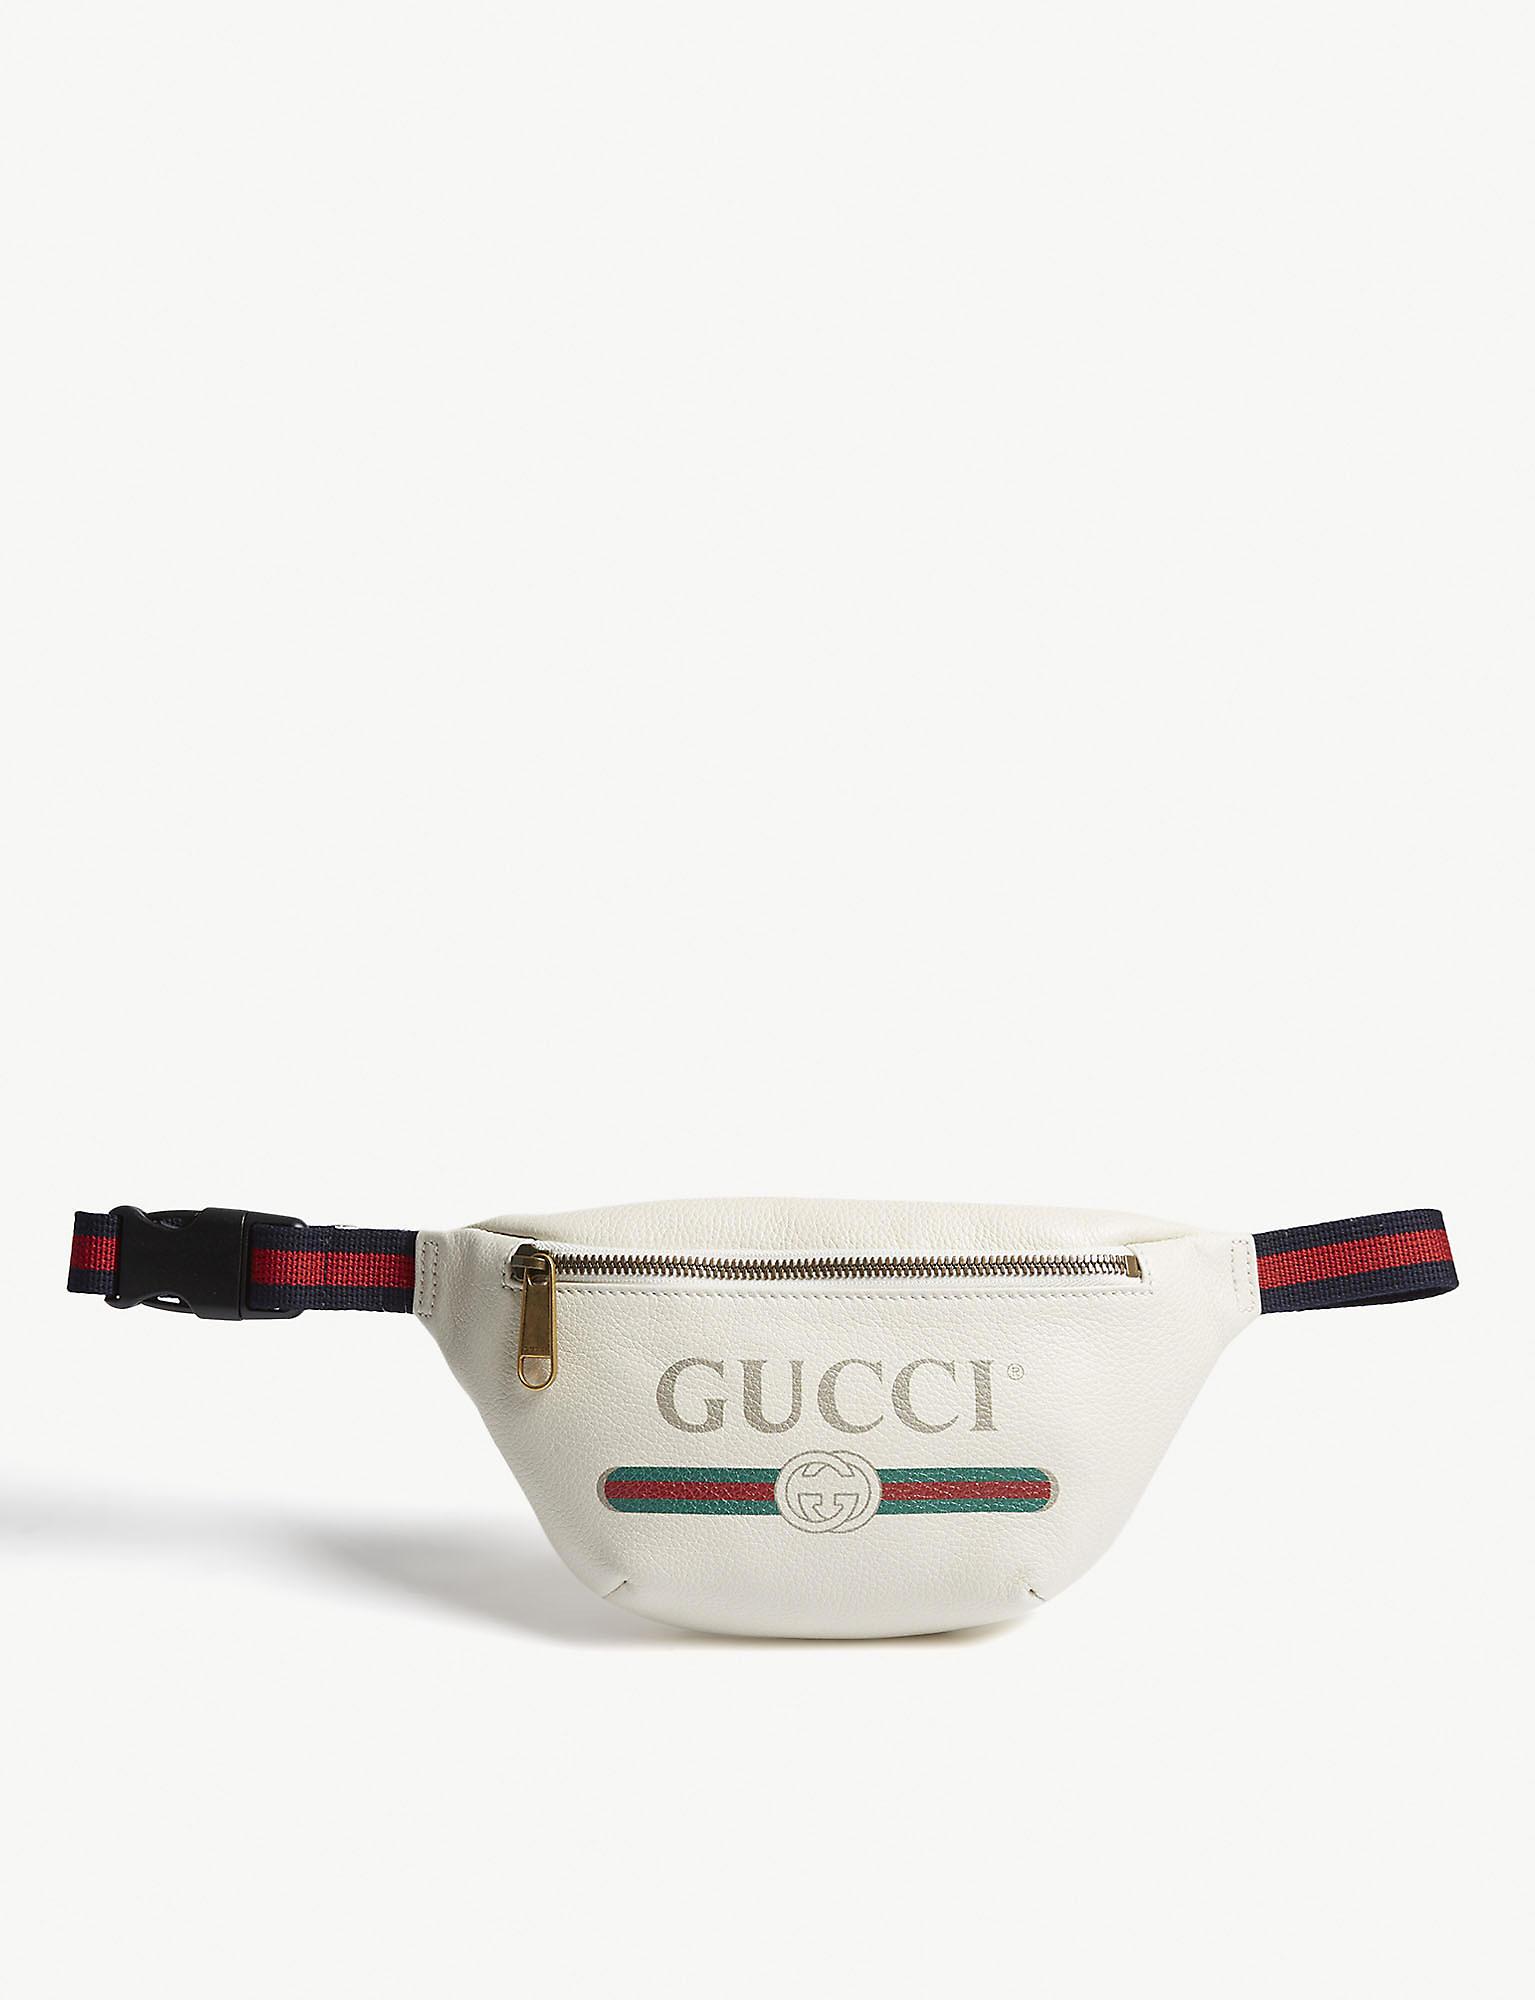 Gucci Vintage Logo Small Leather Belt Bag in White - Lyst